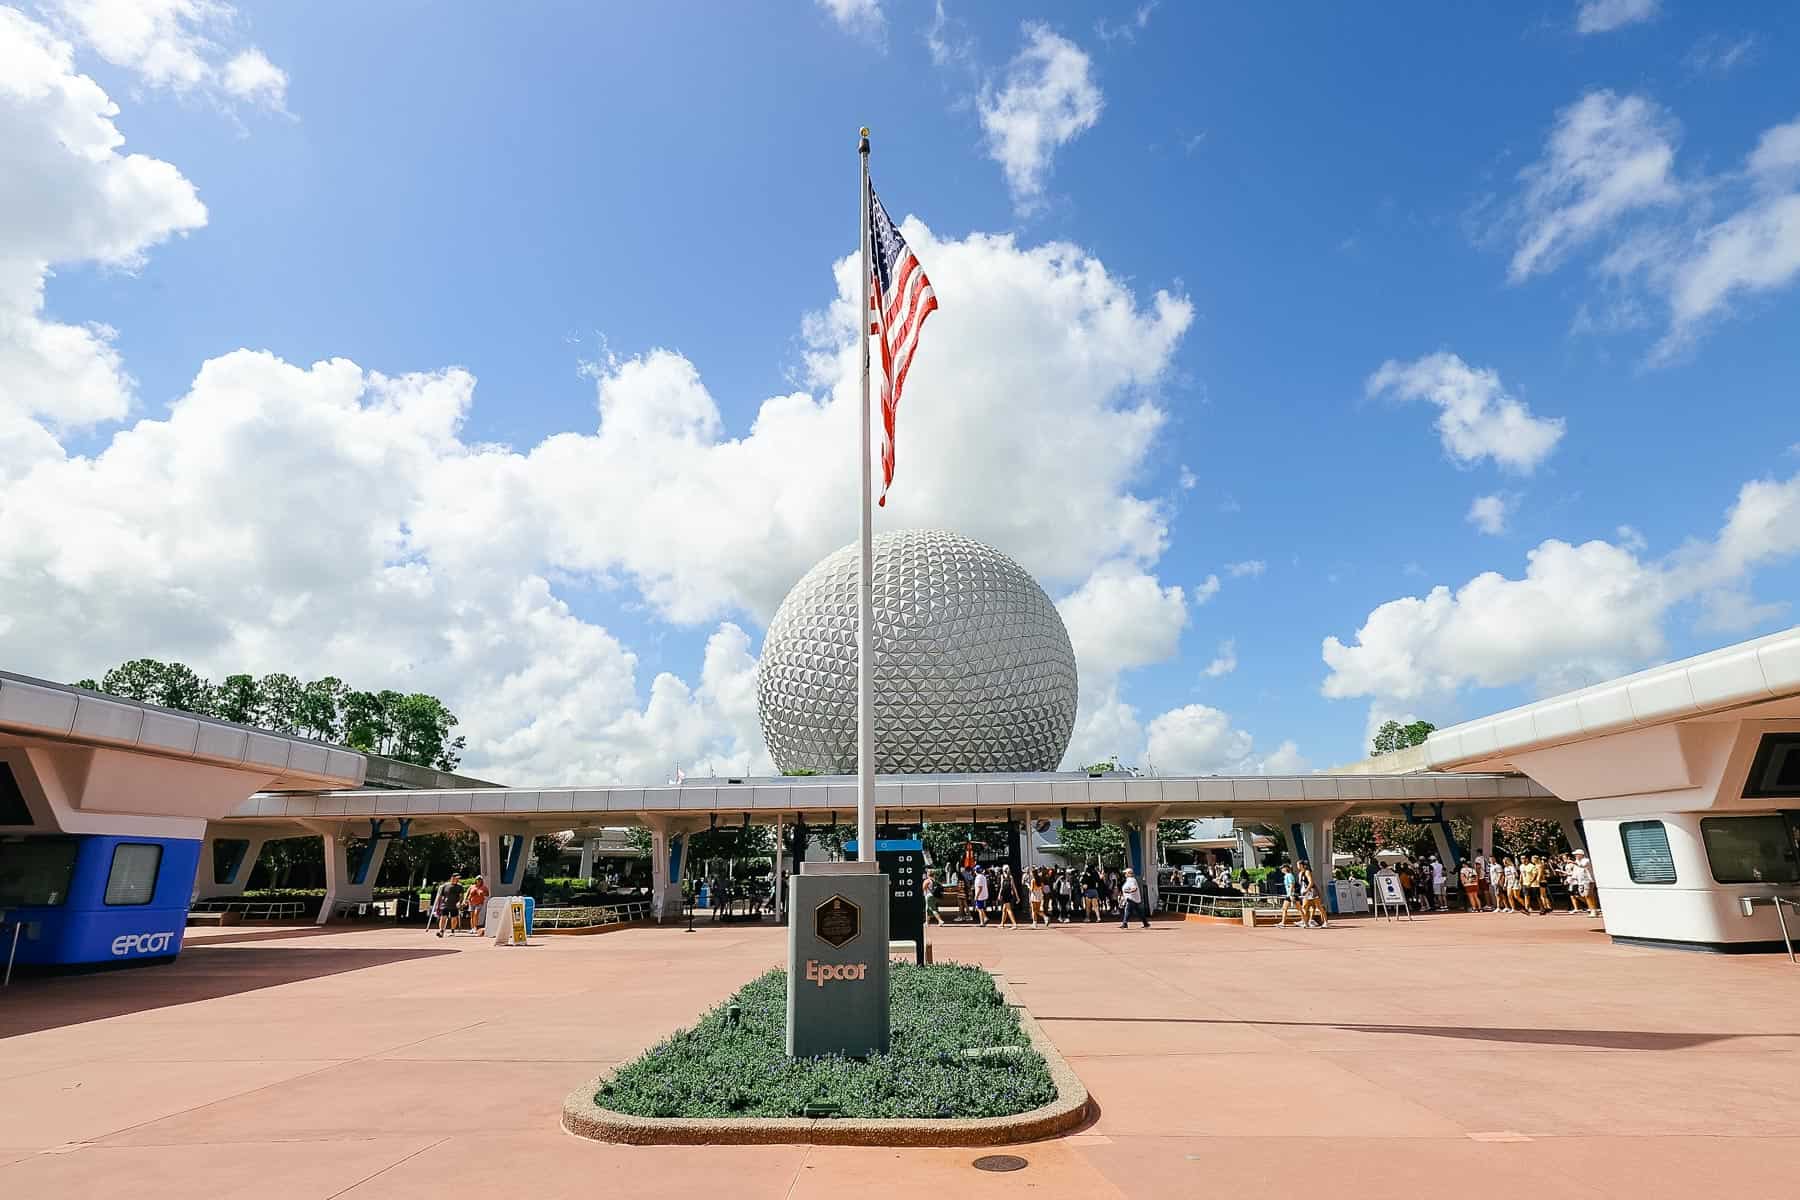 Epcot's entrance from the parking lot with the American flag and Spaceship Earth in the background. 